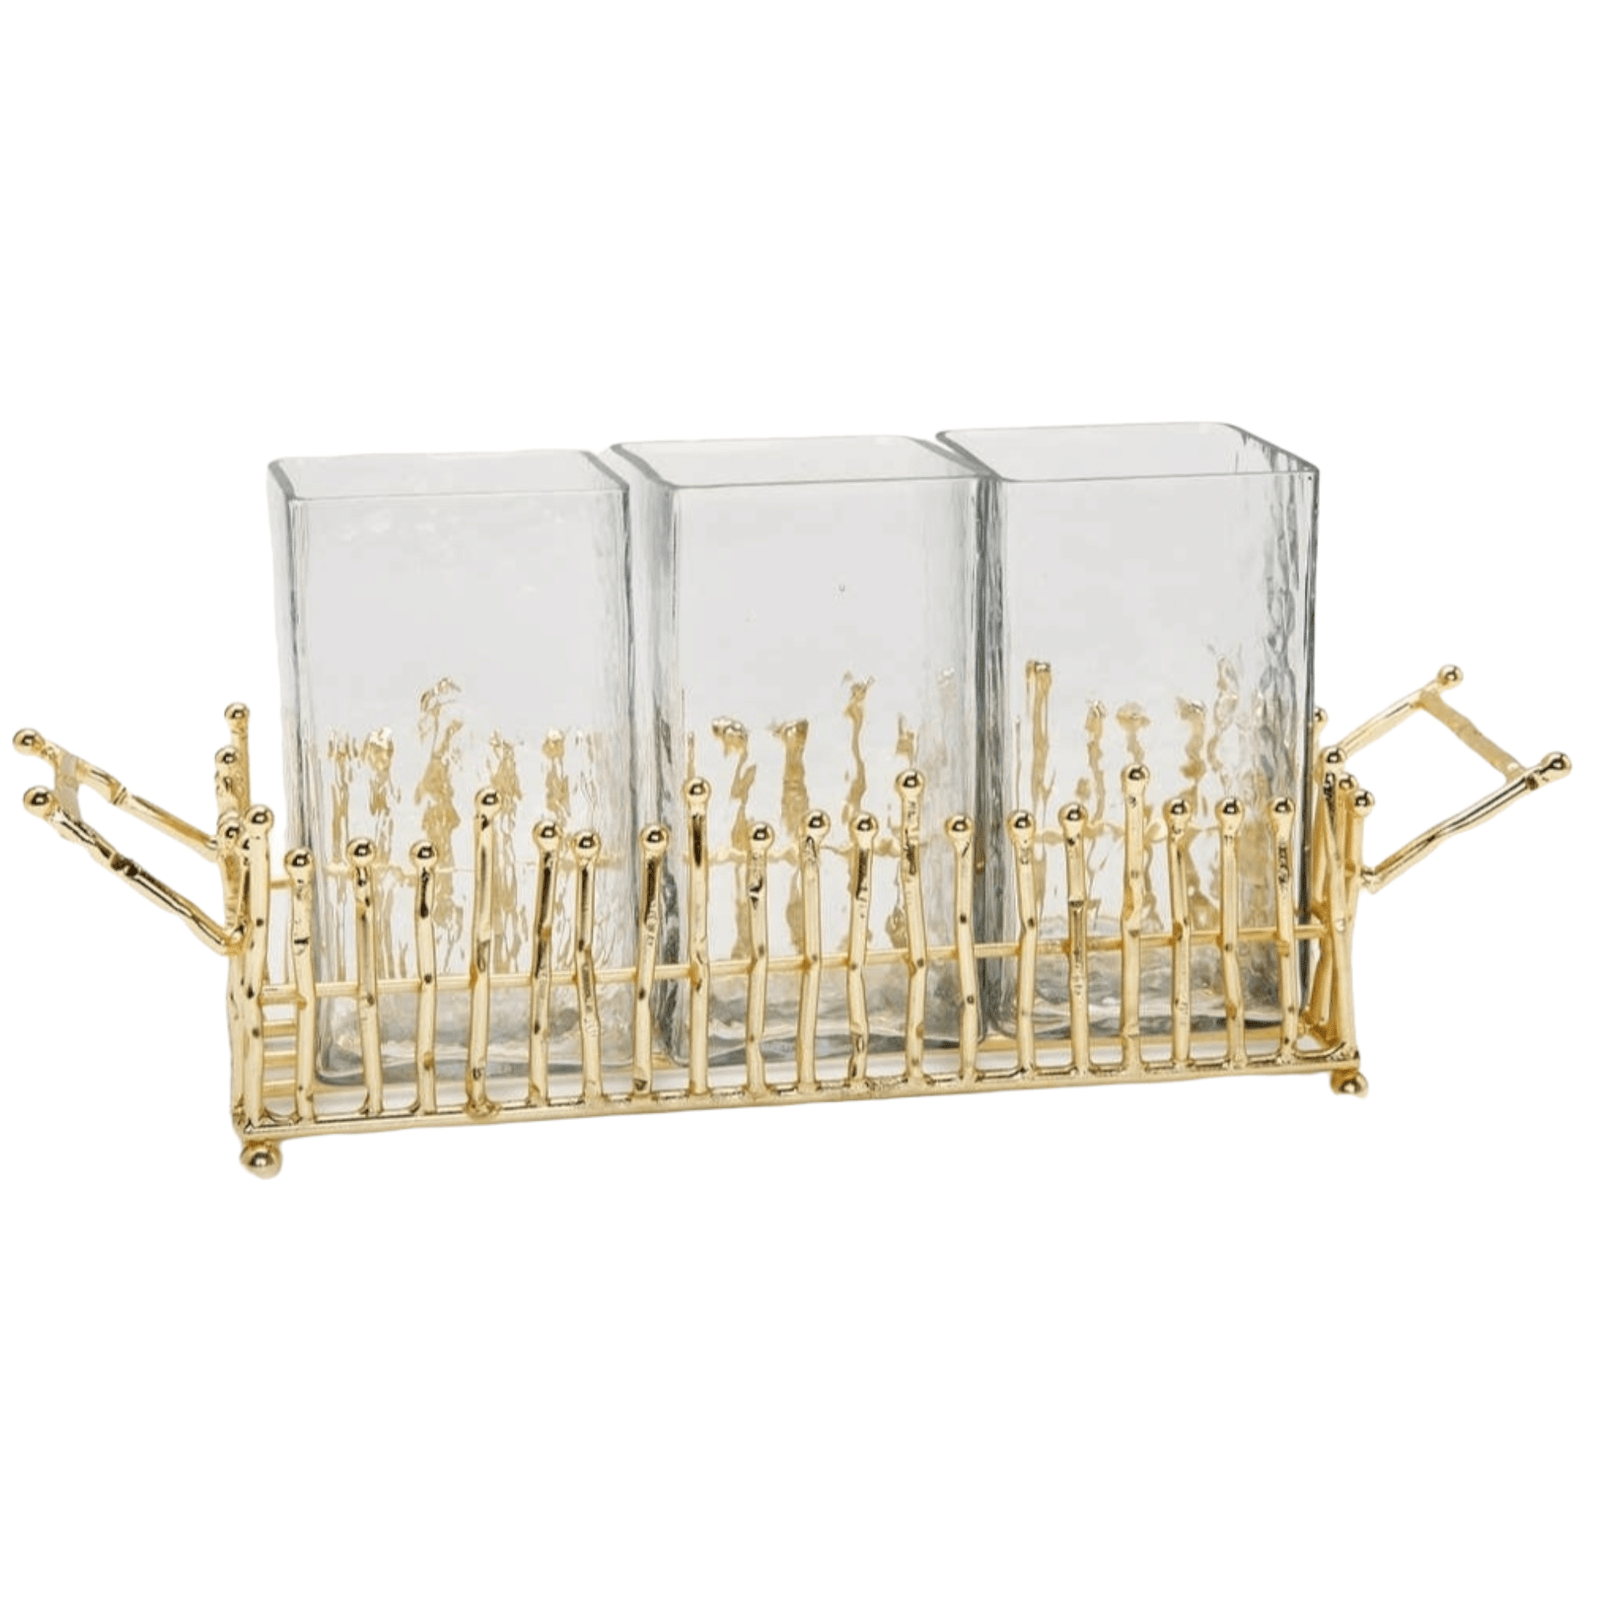 Gold Cutlery Holder w/Glass Inserts - Exquisite Designs Home Décor 